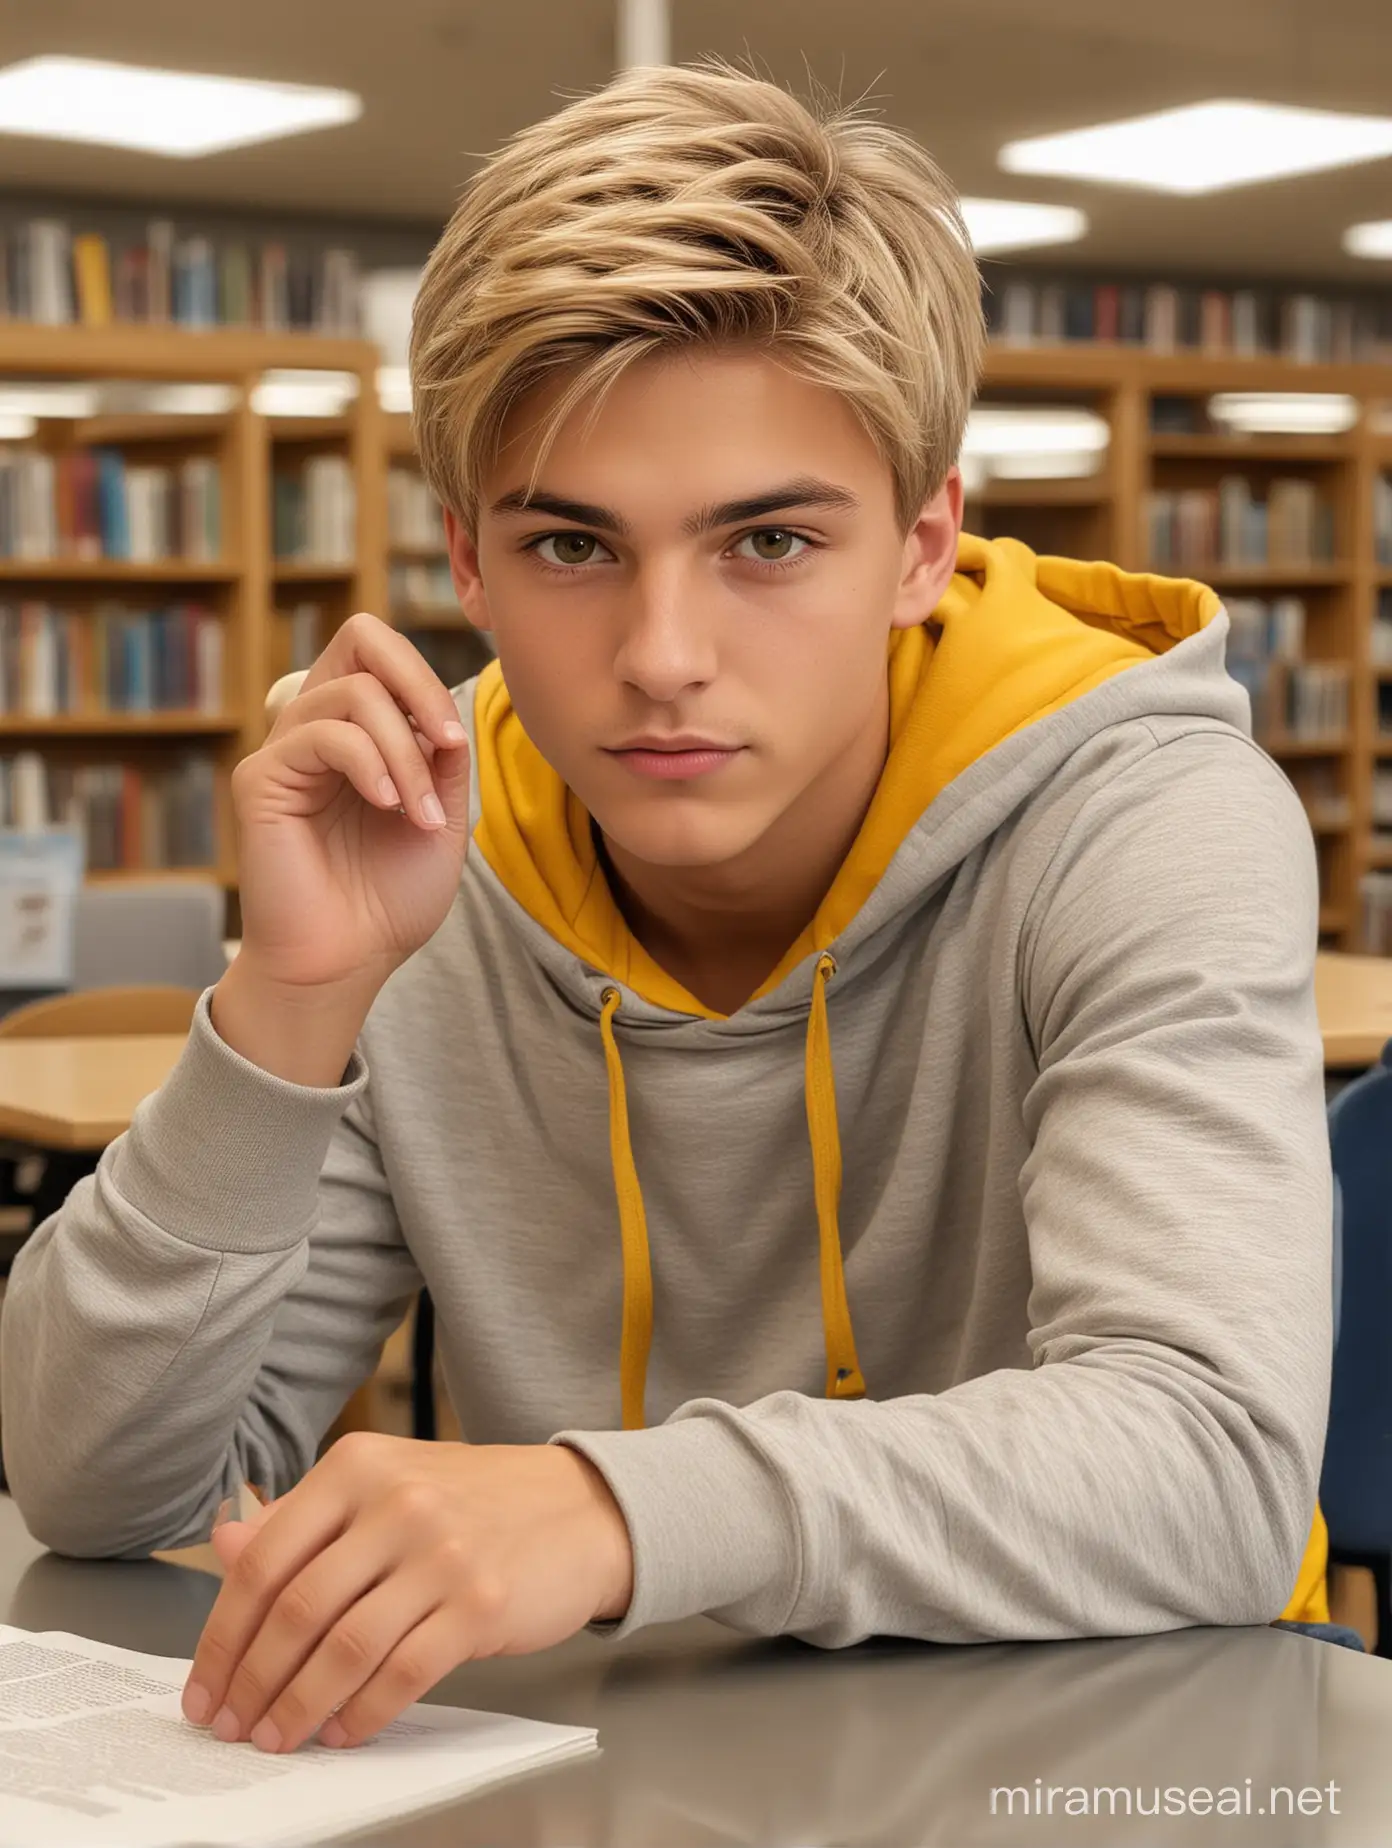 Attractive 18YearOld Blonde Athlete Reading in School Library